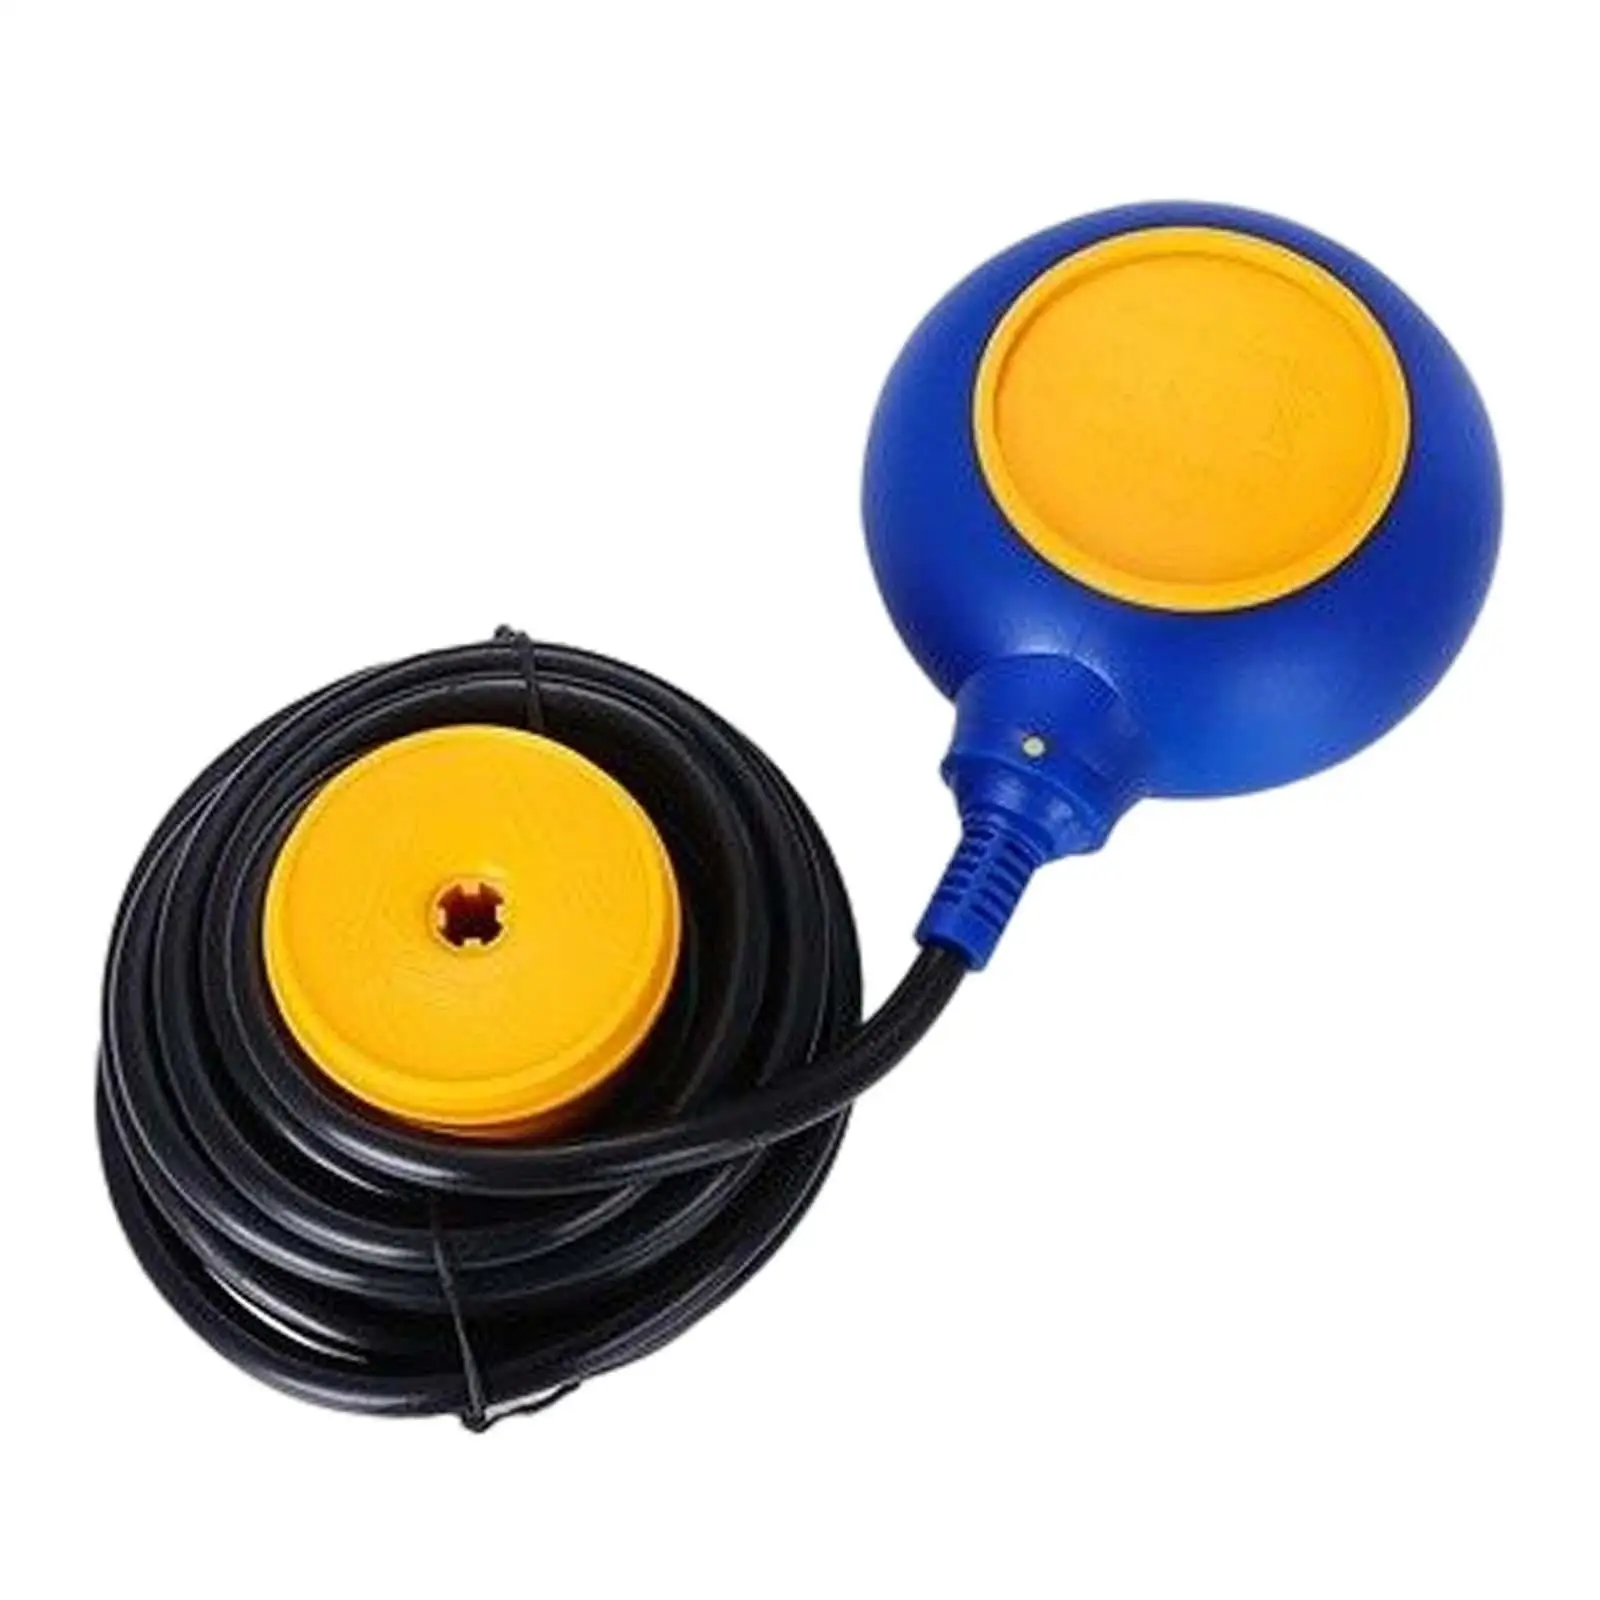 2M Cable Float Switch Durable Liquid Water Level Float Switch Water Level Controller for Water Tank Troughs